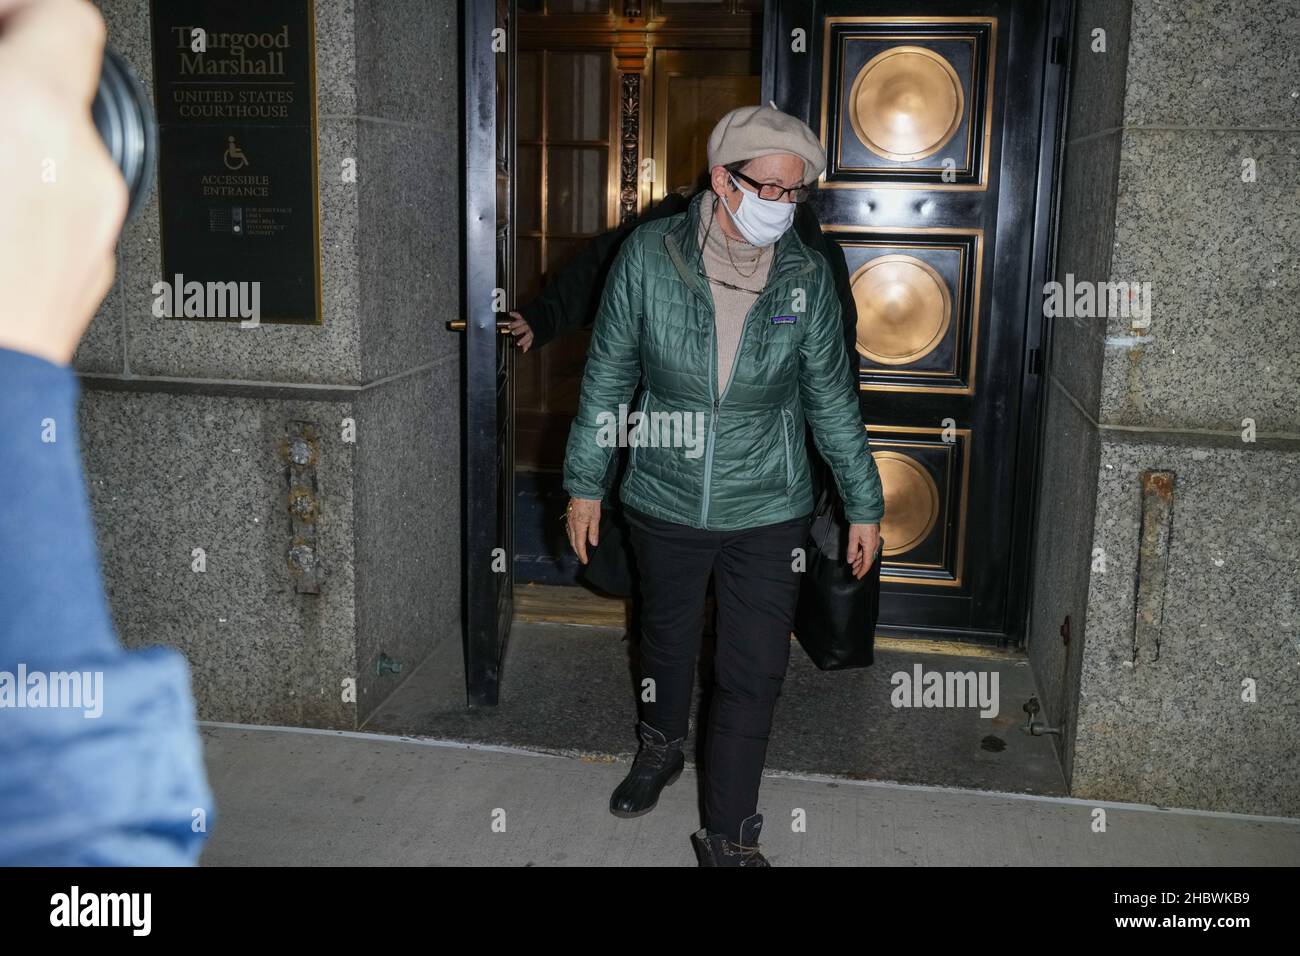 New York, United States. 21st Dec, 2021. Isabel Maxwell, sister of Ghislaine Maxwell, exits the Thurgood Marshall United States Courthouse in Manhattan as the jury deliberates in New York City. The 59-year-old Ghislaine Maxwell is accused of helping the financier Jeffrey Epstein recruit and sexually abuse four underage girls for years. If convicted the British socialite could face up to 80 years in prison. Credit: SOPA Images Limited/Alamy Live News Stock Photo